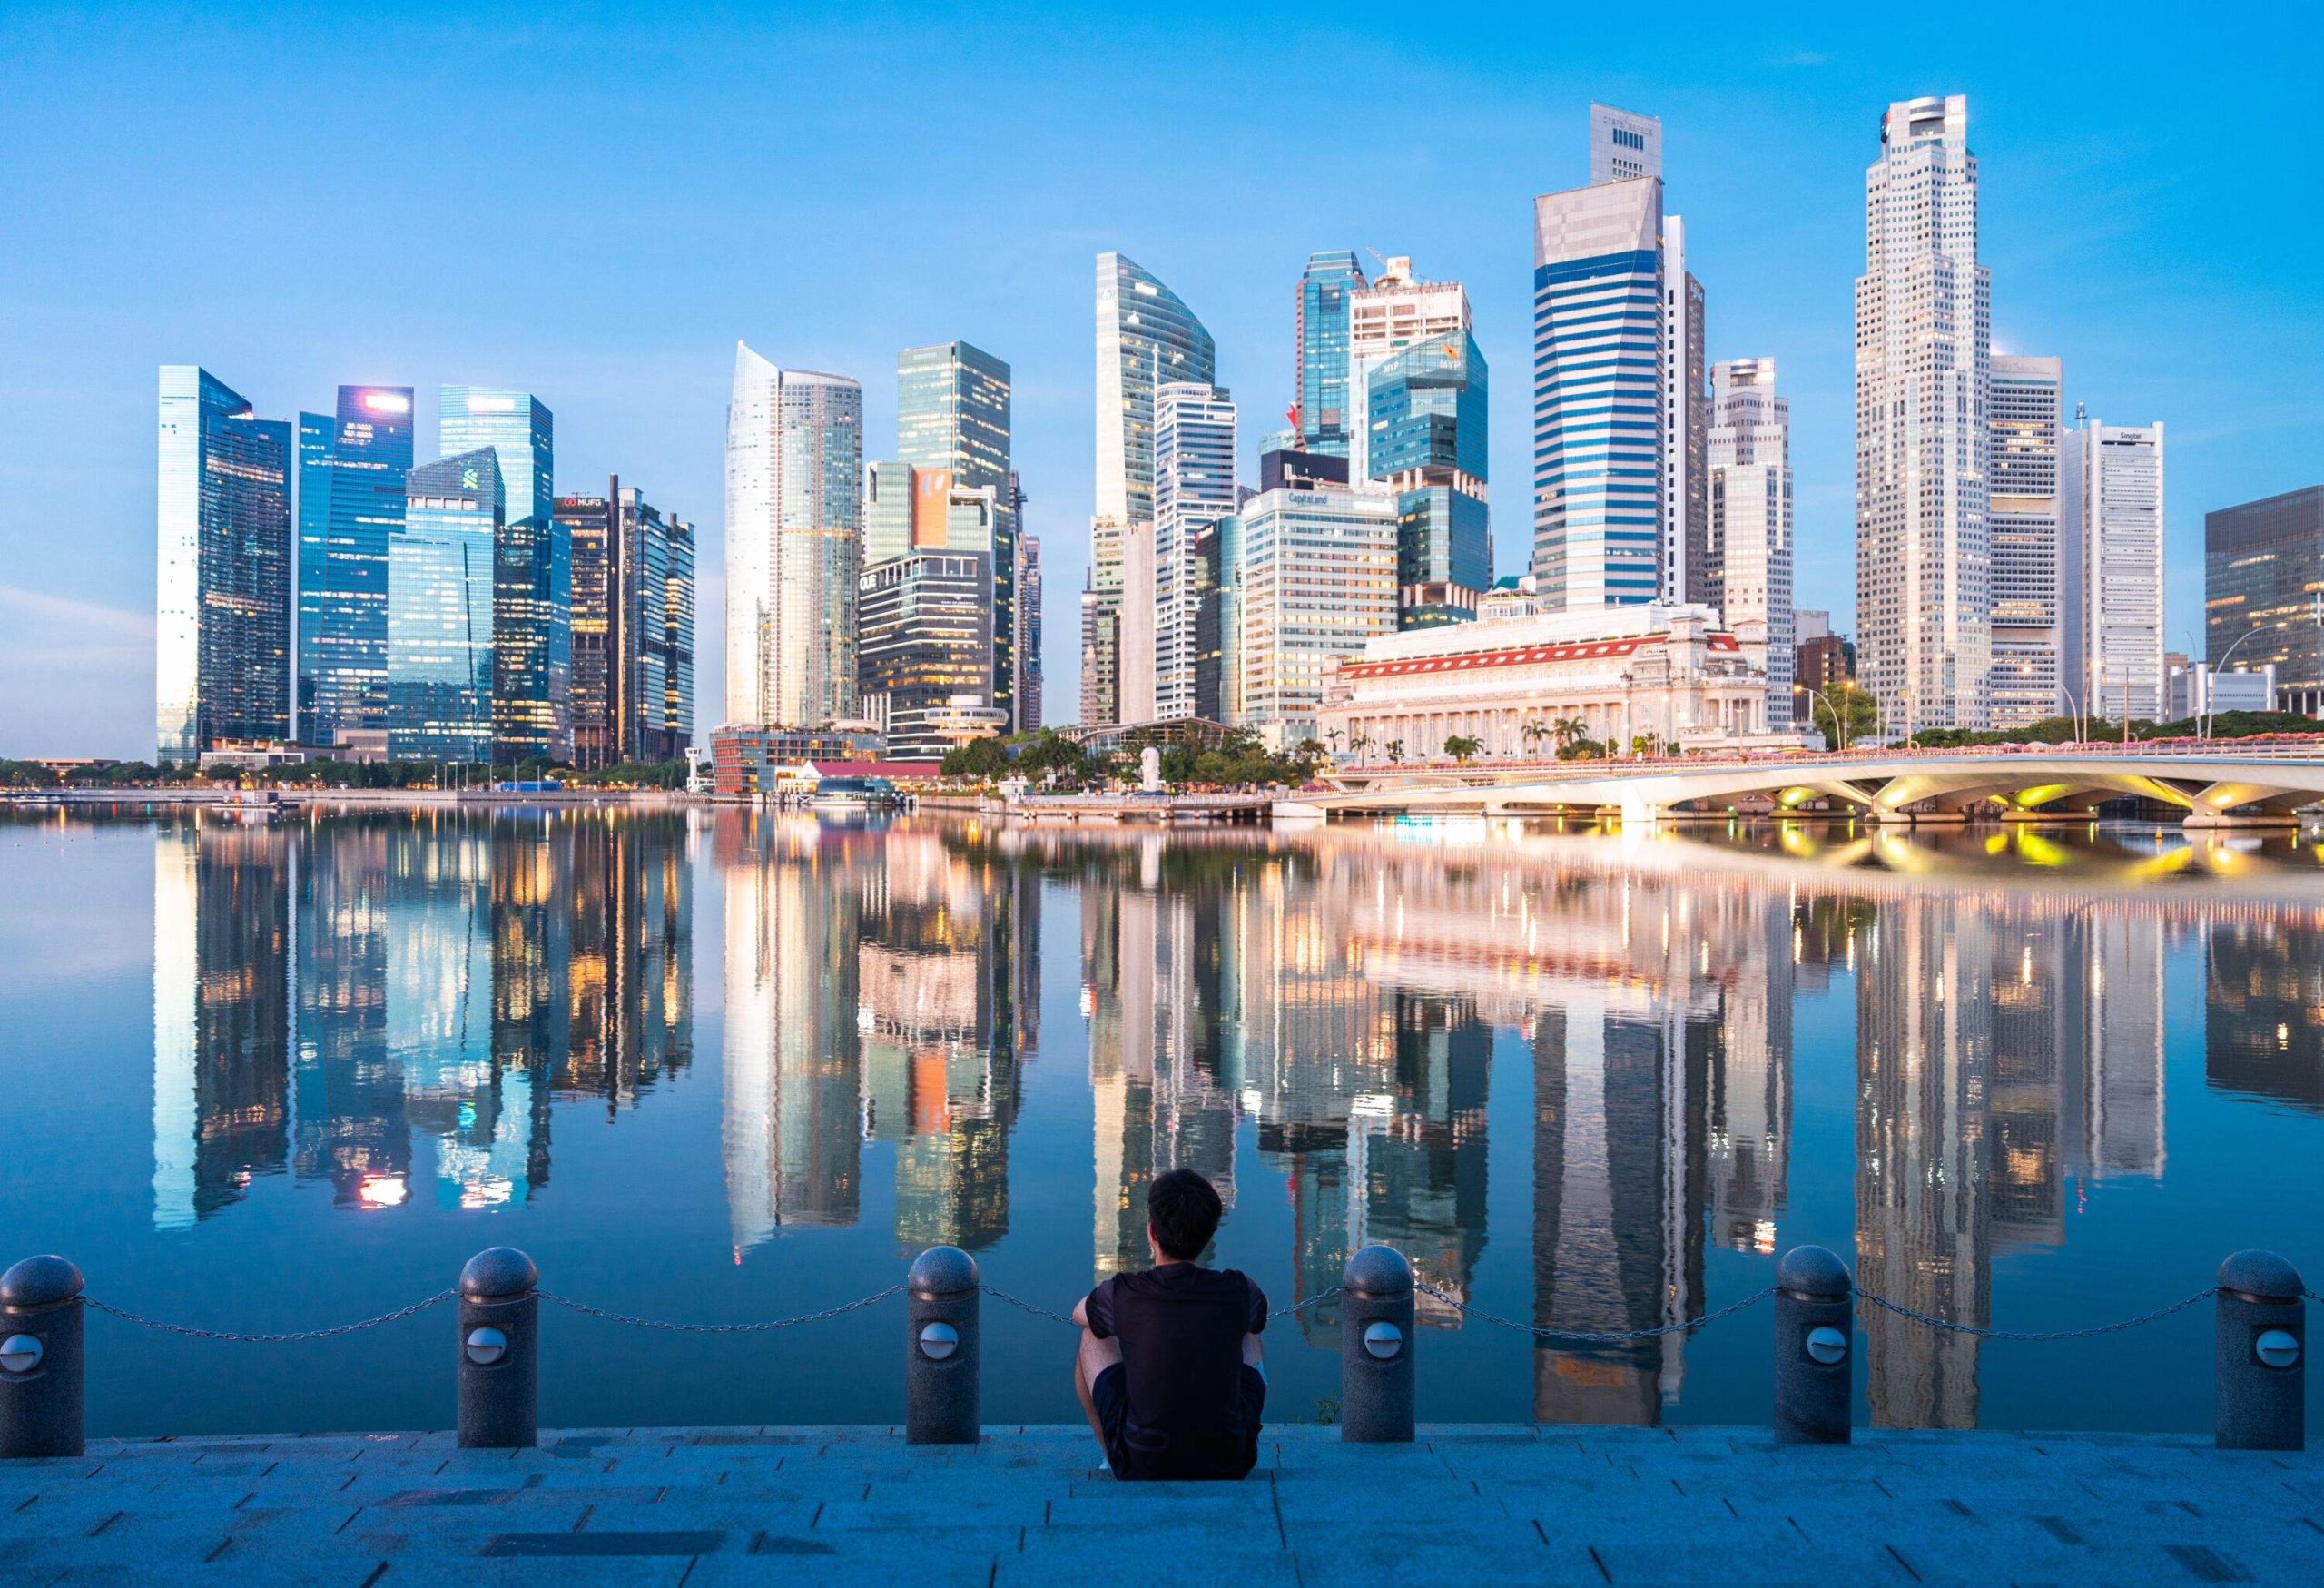 The young man sat and stand on the dock with urban skyline and skyscrapers in Marina Bay Singapore.